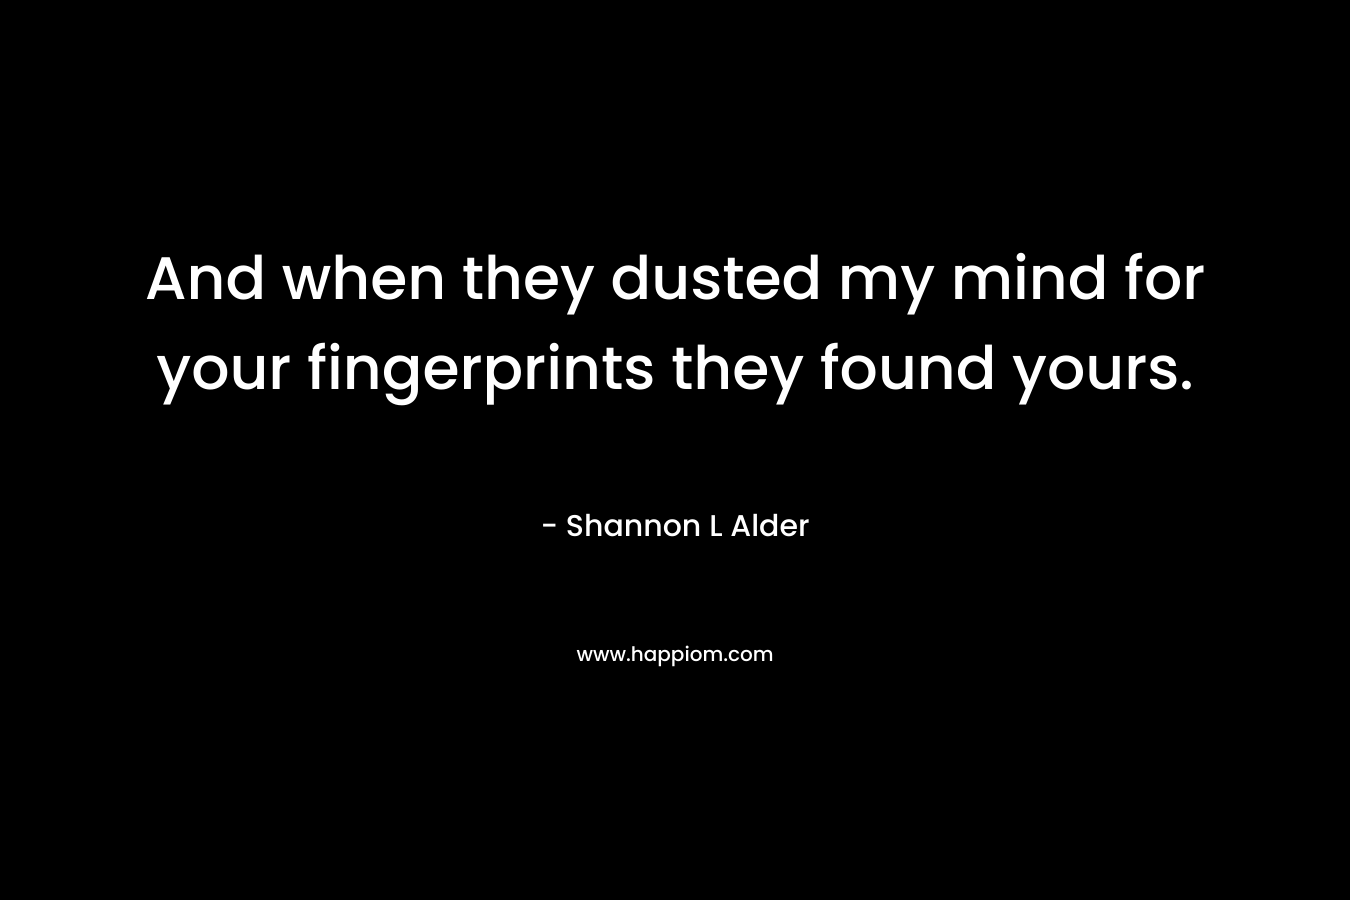 And when they dusted my mind for your fingerprints they found yours.